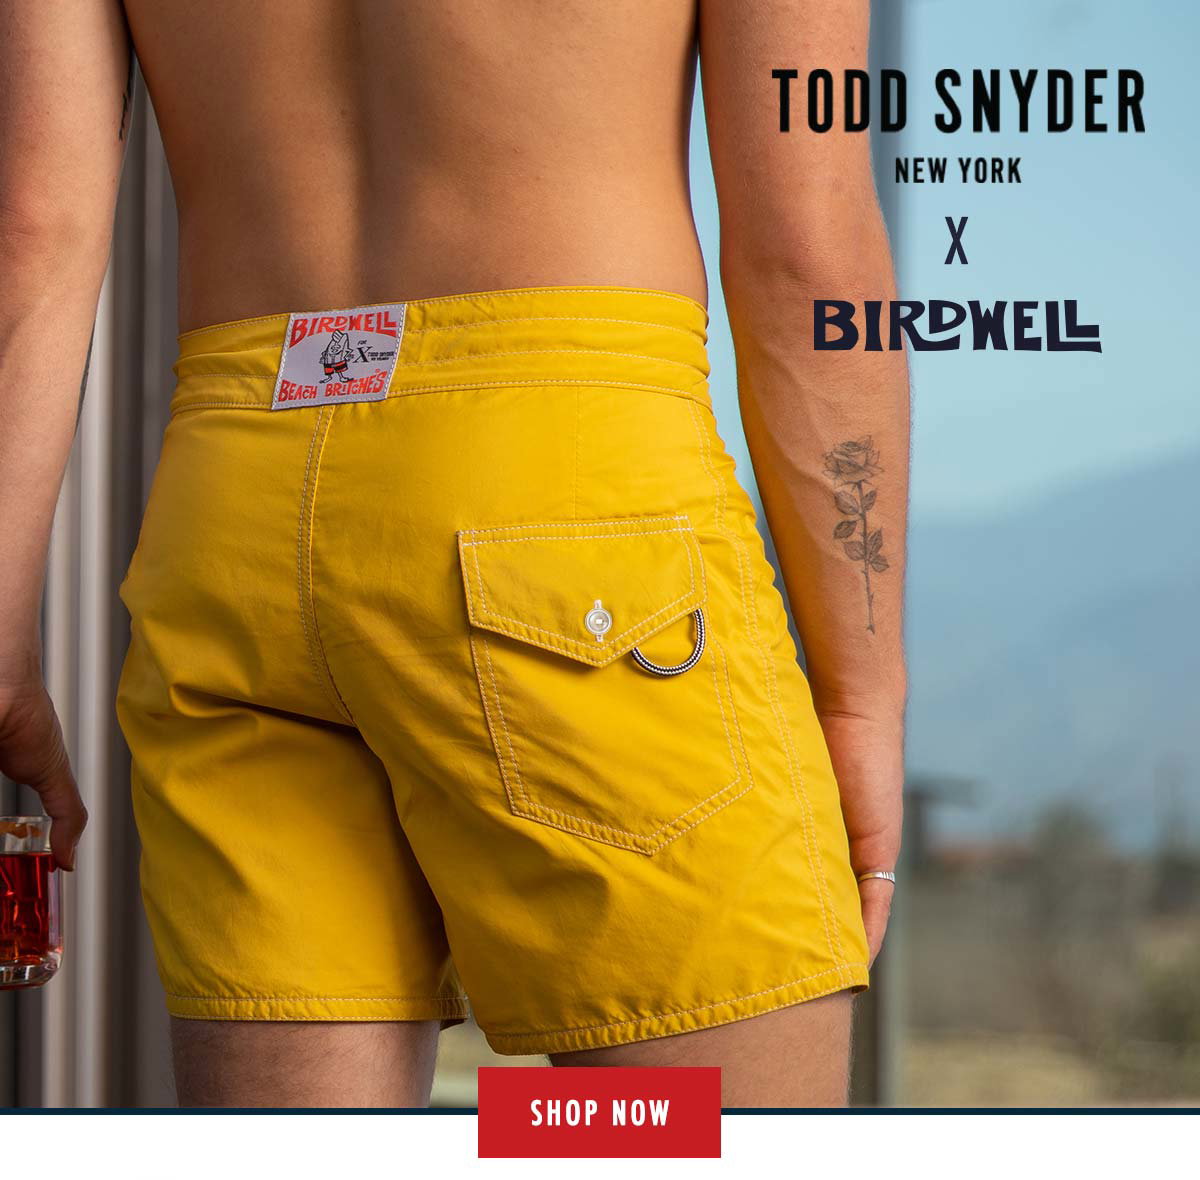 Birdwell 310 Boardshorts - Red | Size 32 | 15-16 Length | Made in The USA | Birdwell Beach Britches